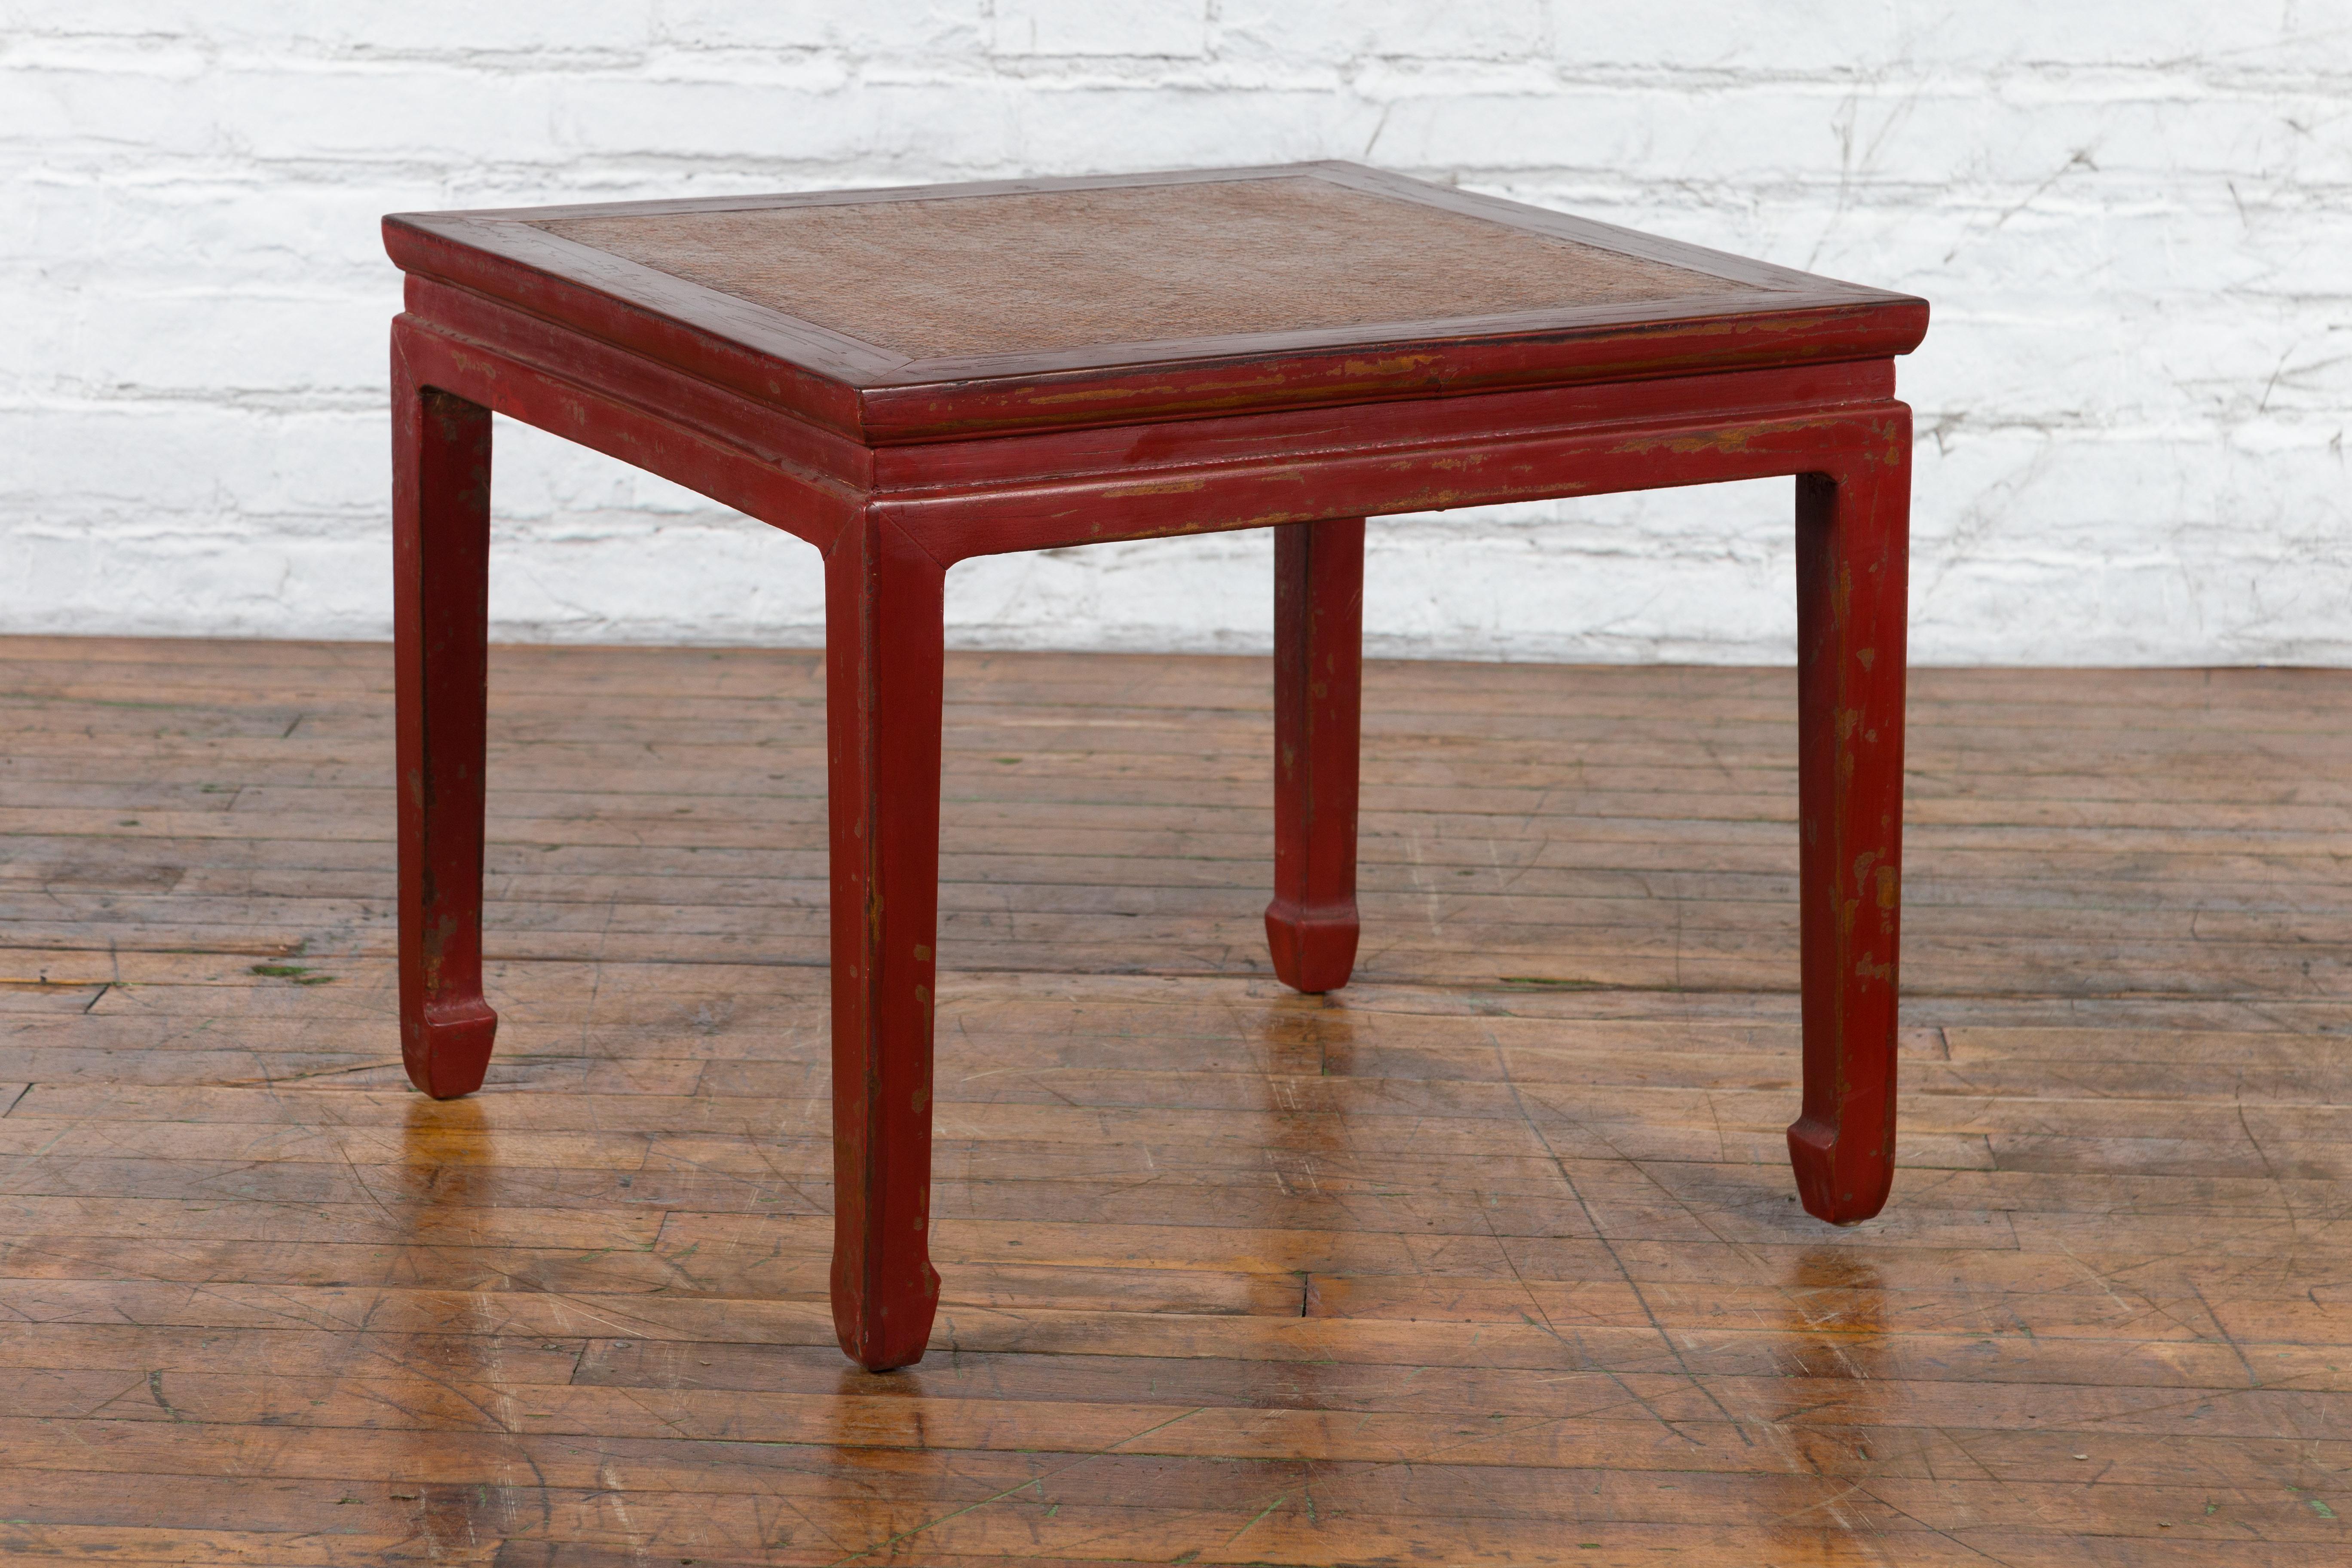 Chinese Qing Dynasty 19th Century Red Lacquer Side Table with Woven Rattan Top For Sale 11